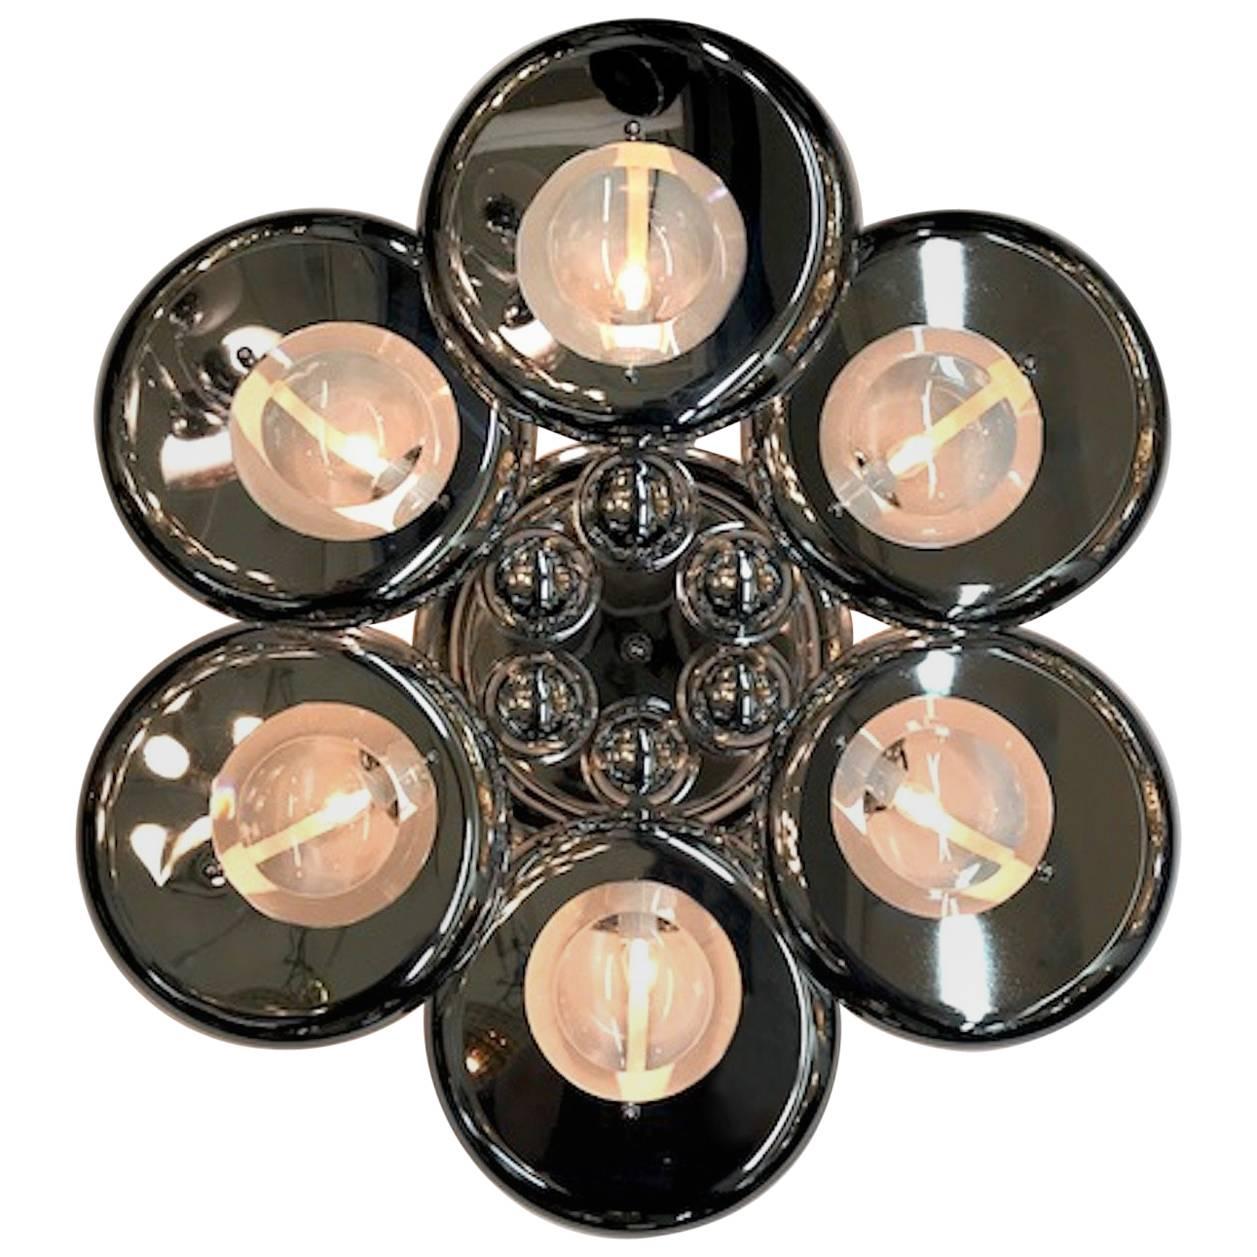 Italian 1970s Sculptural Chrome and Glass Lens Sconce